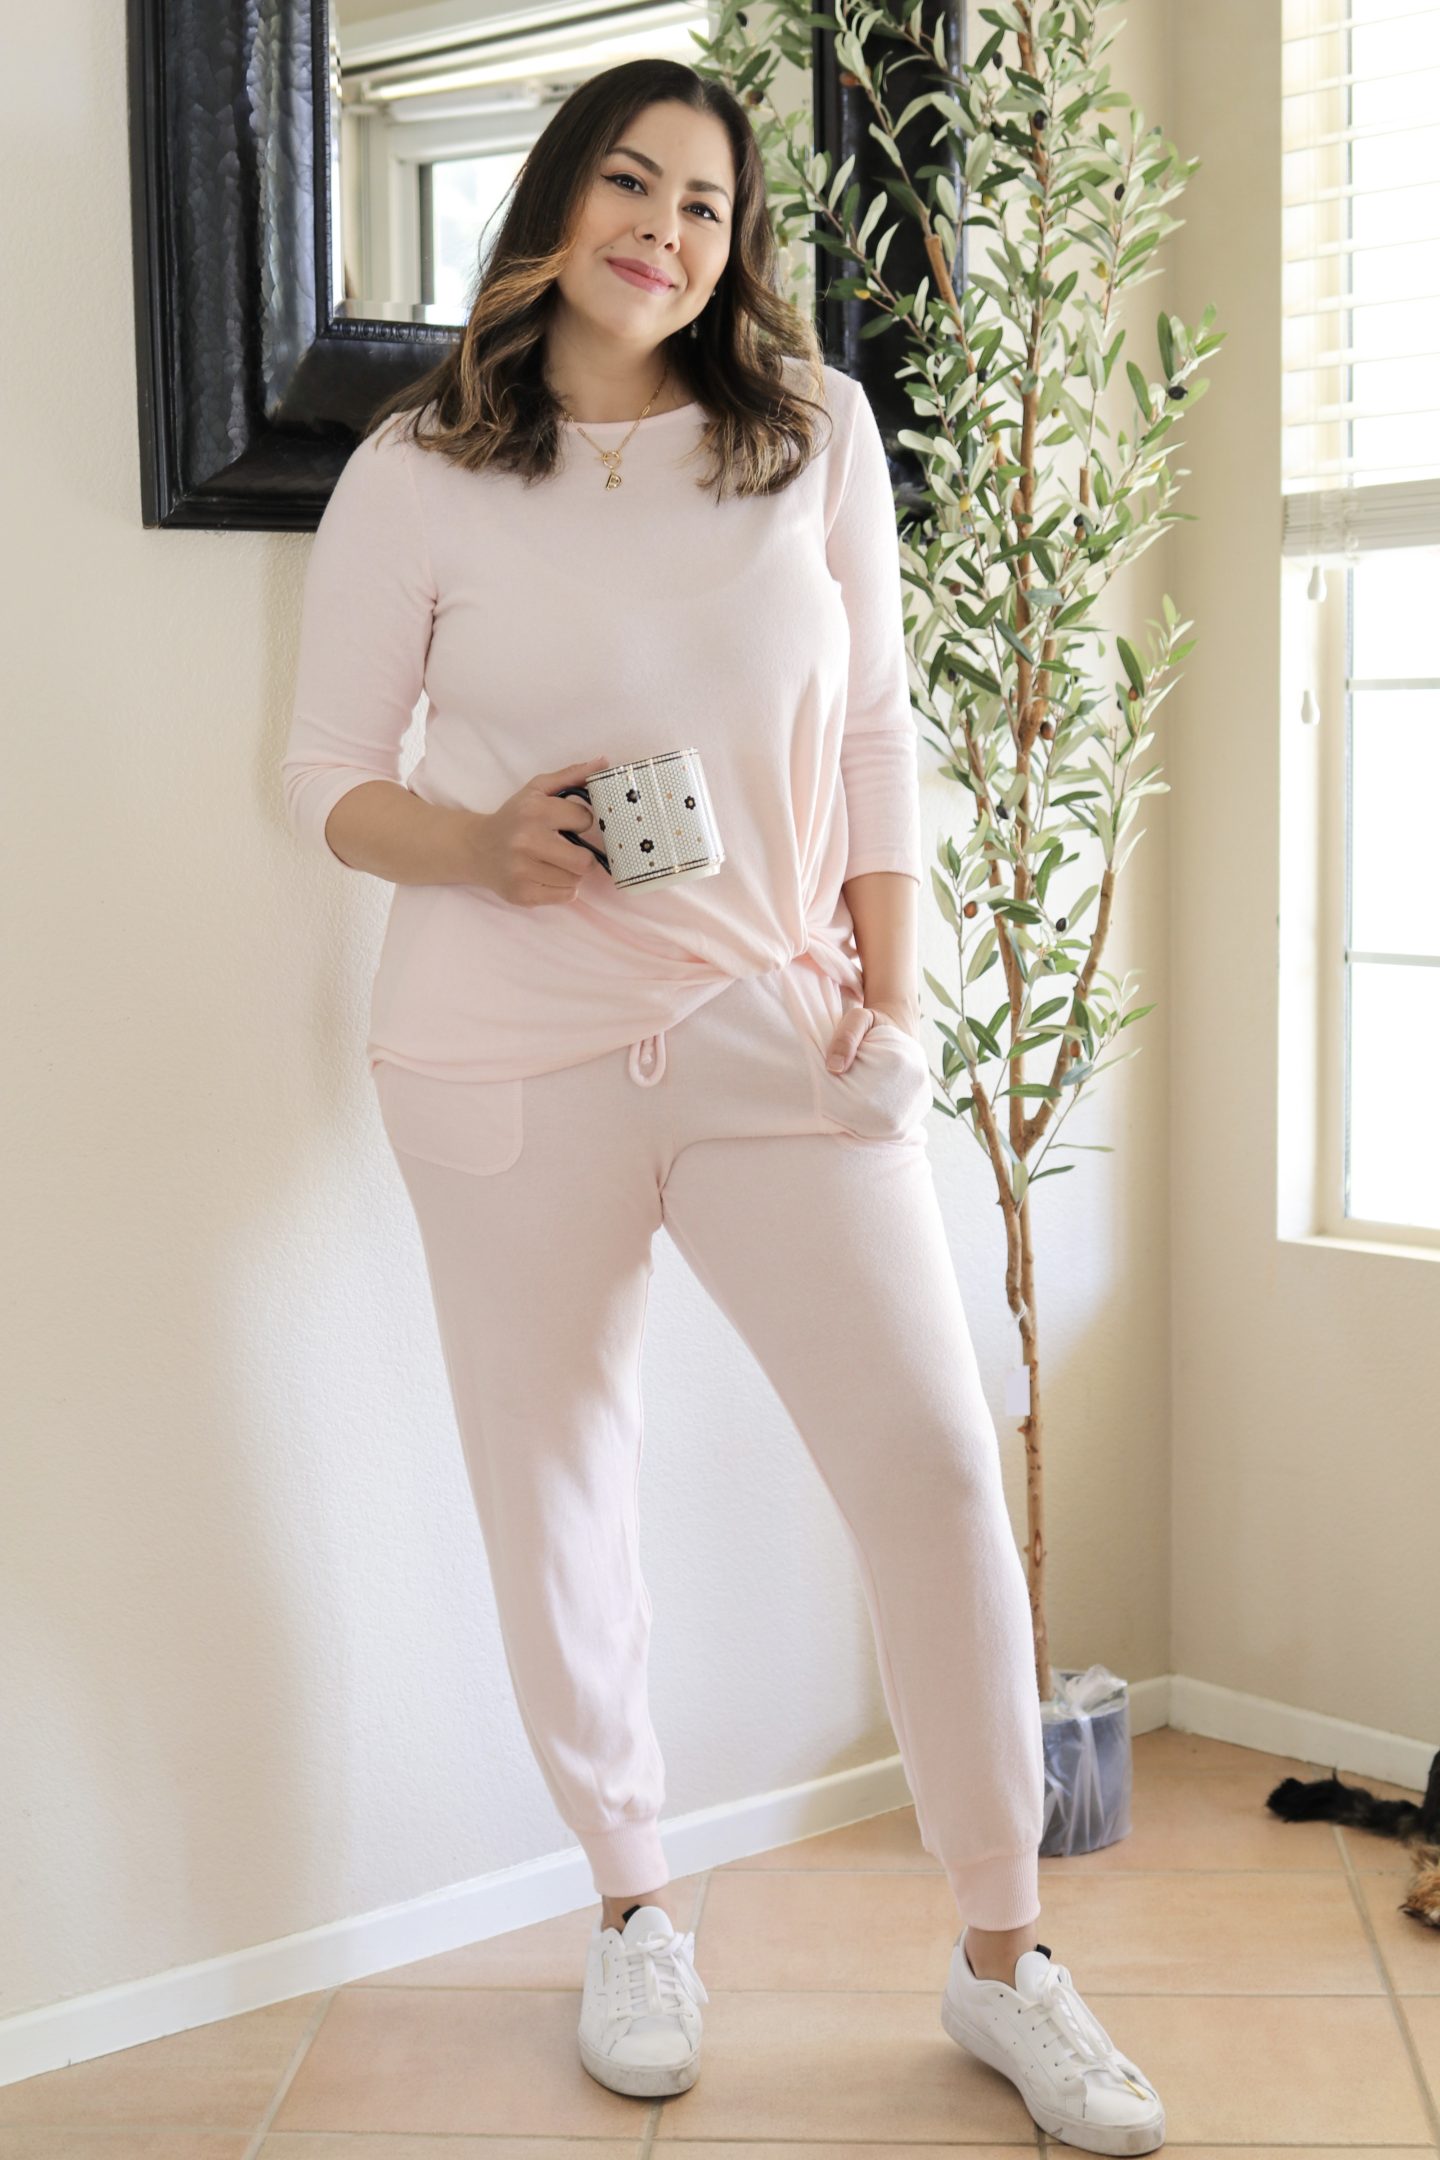 Comfortable Loungewear Sets, San Diego Style Blogger styling at home, sleek white adidas